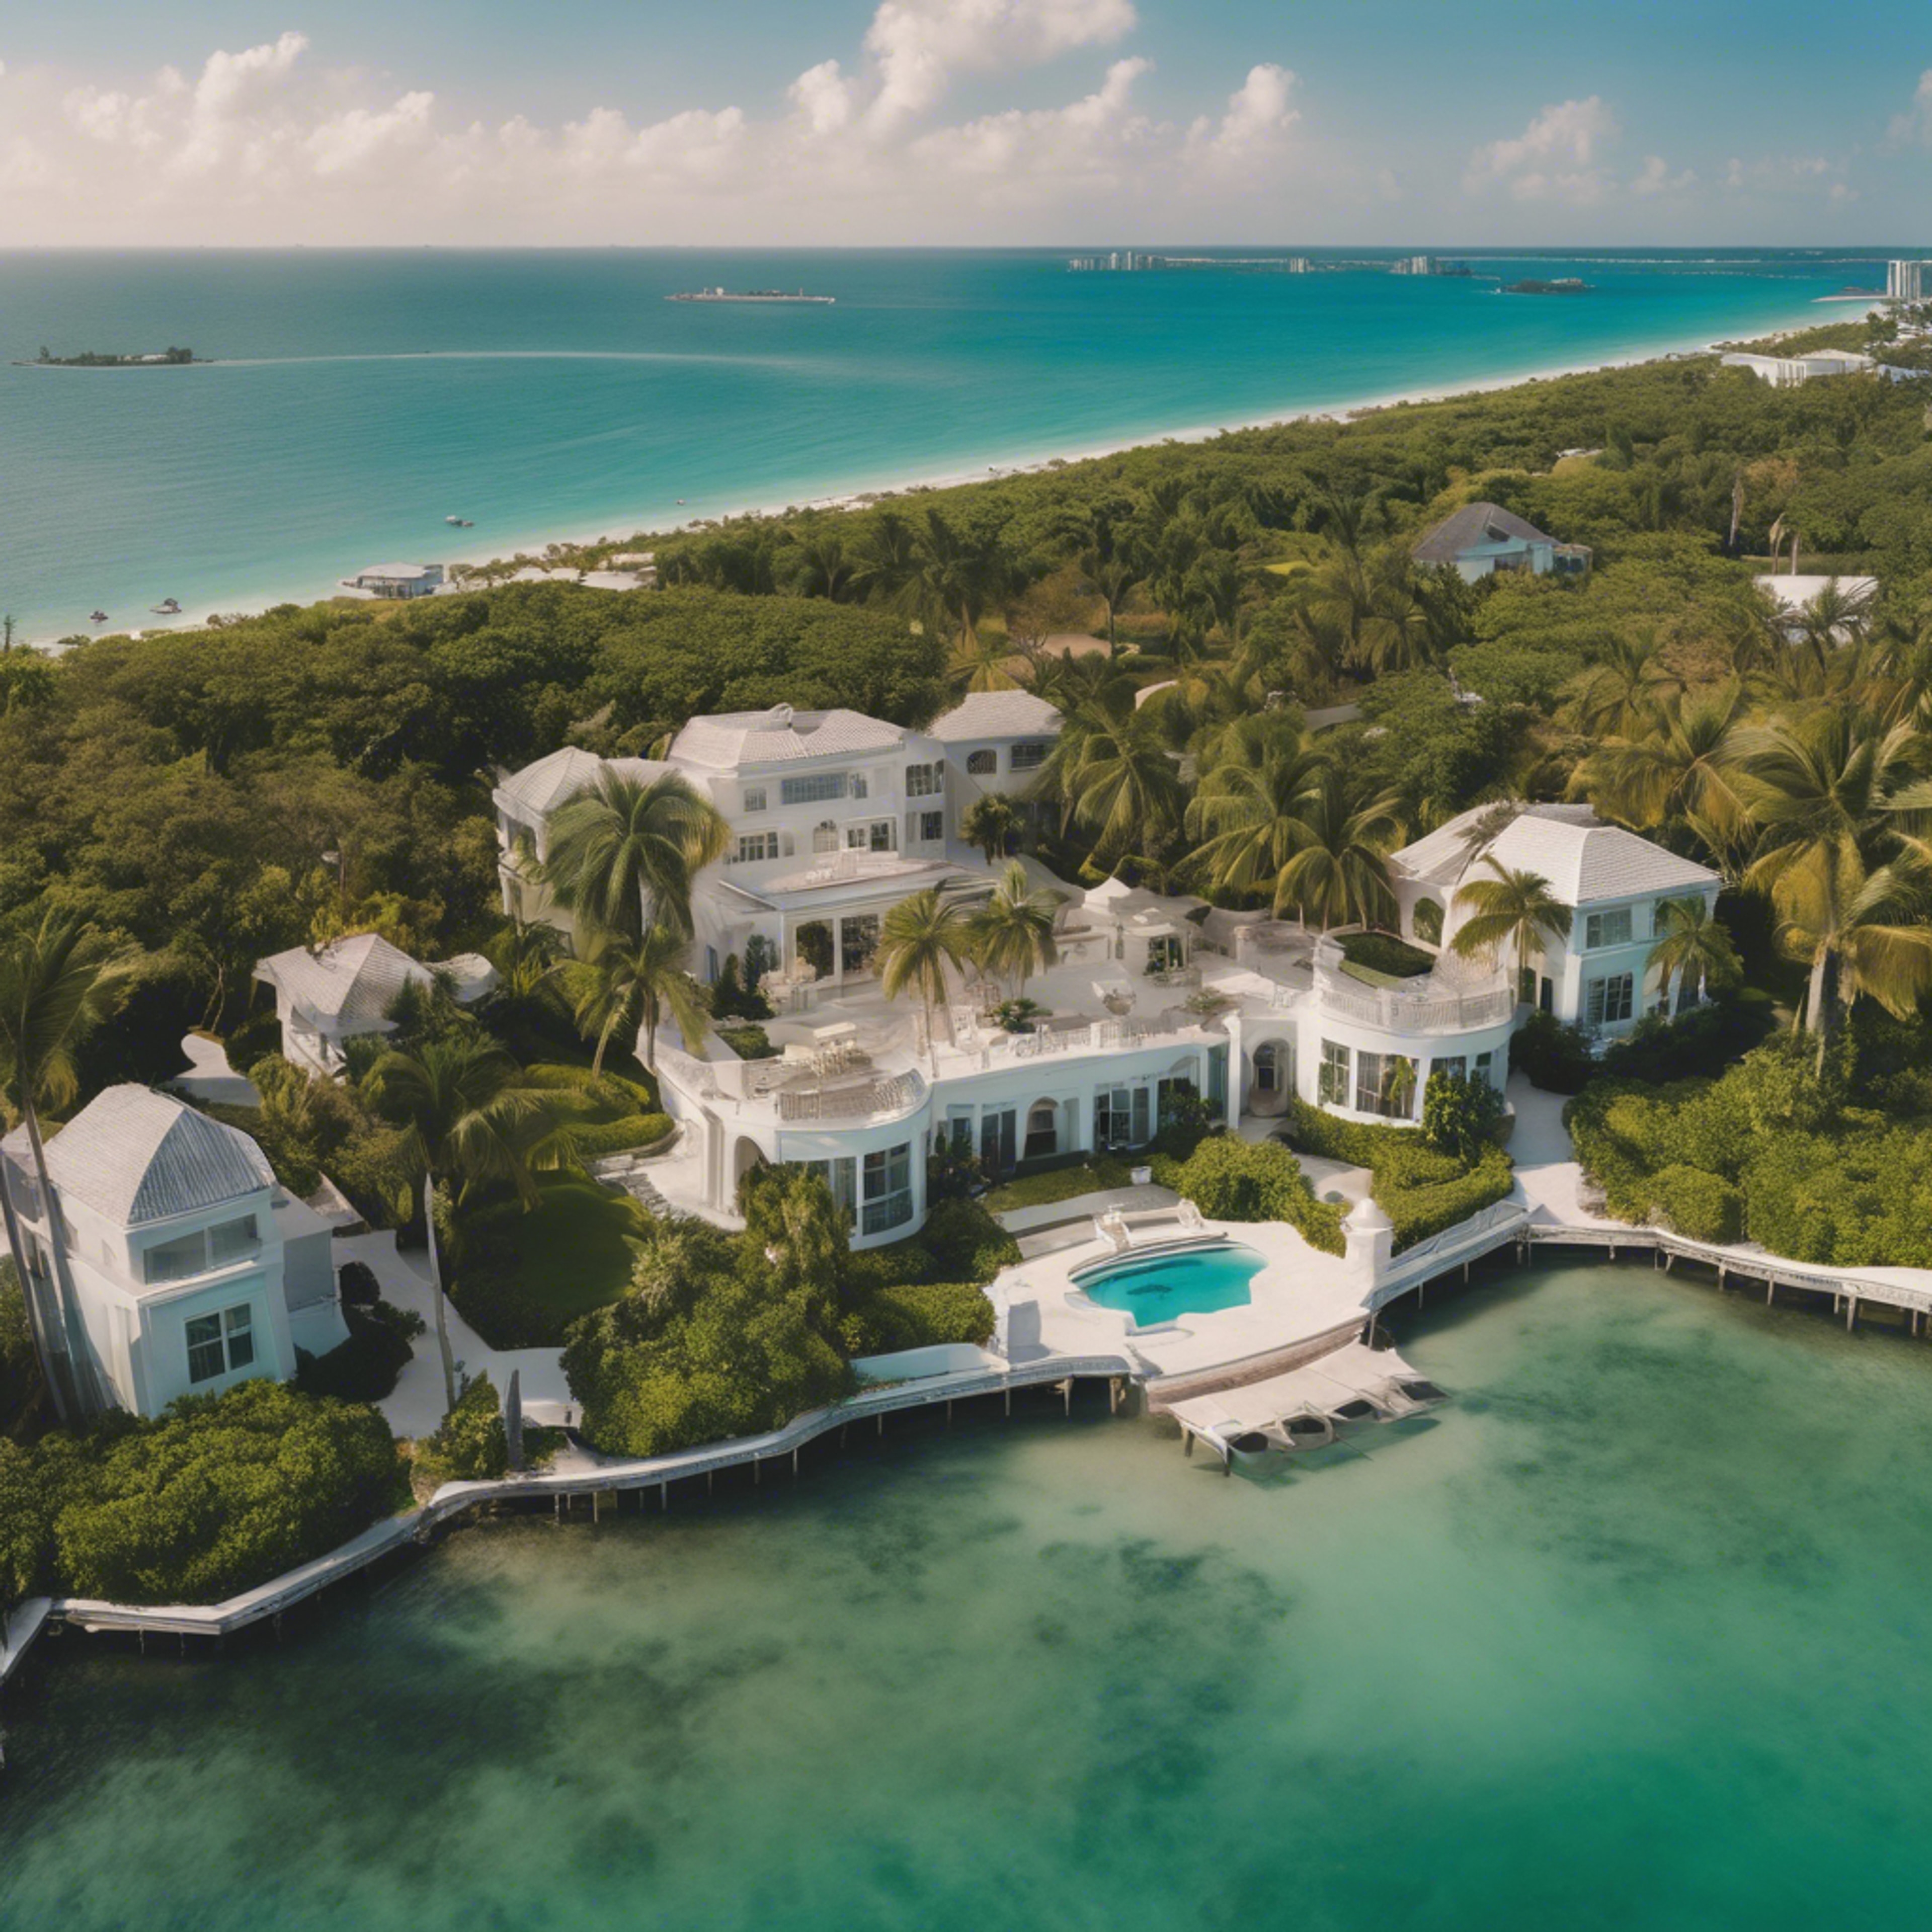 A panoramic aerial view of Star Island, Miami, showcasing the elegant homes and beautiful landscaping. Wallpaper[db6d9a26b3d34ba3a8b6]